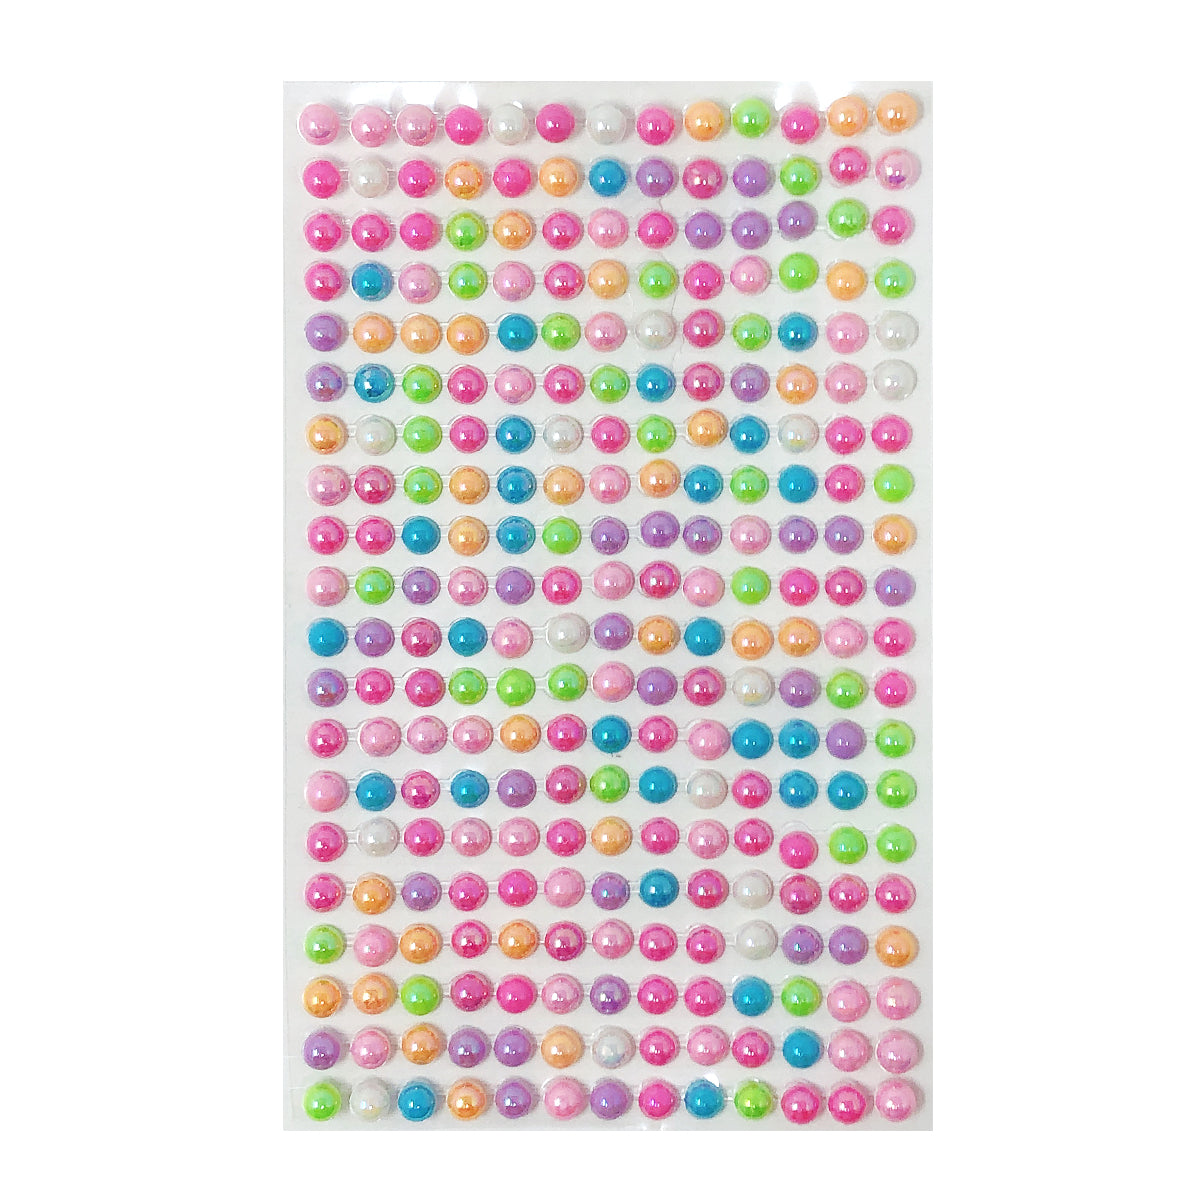 Wrapables 84 Piece Acrylic Adhesive Heart Gems, Light Pink